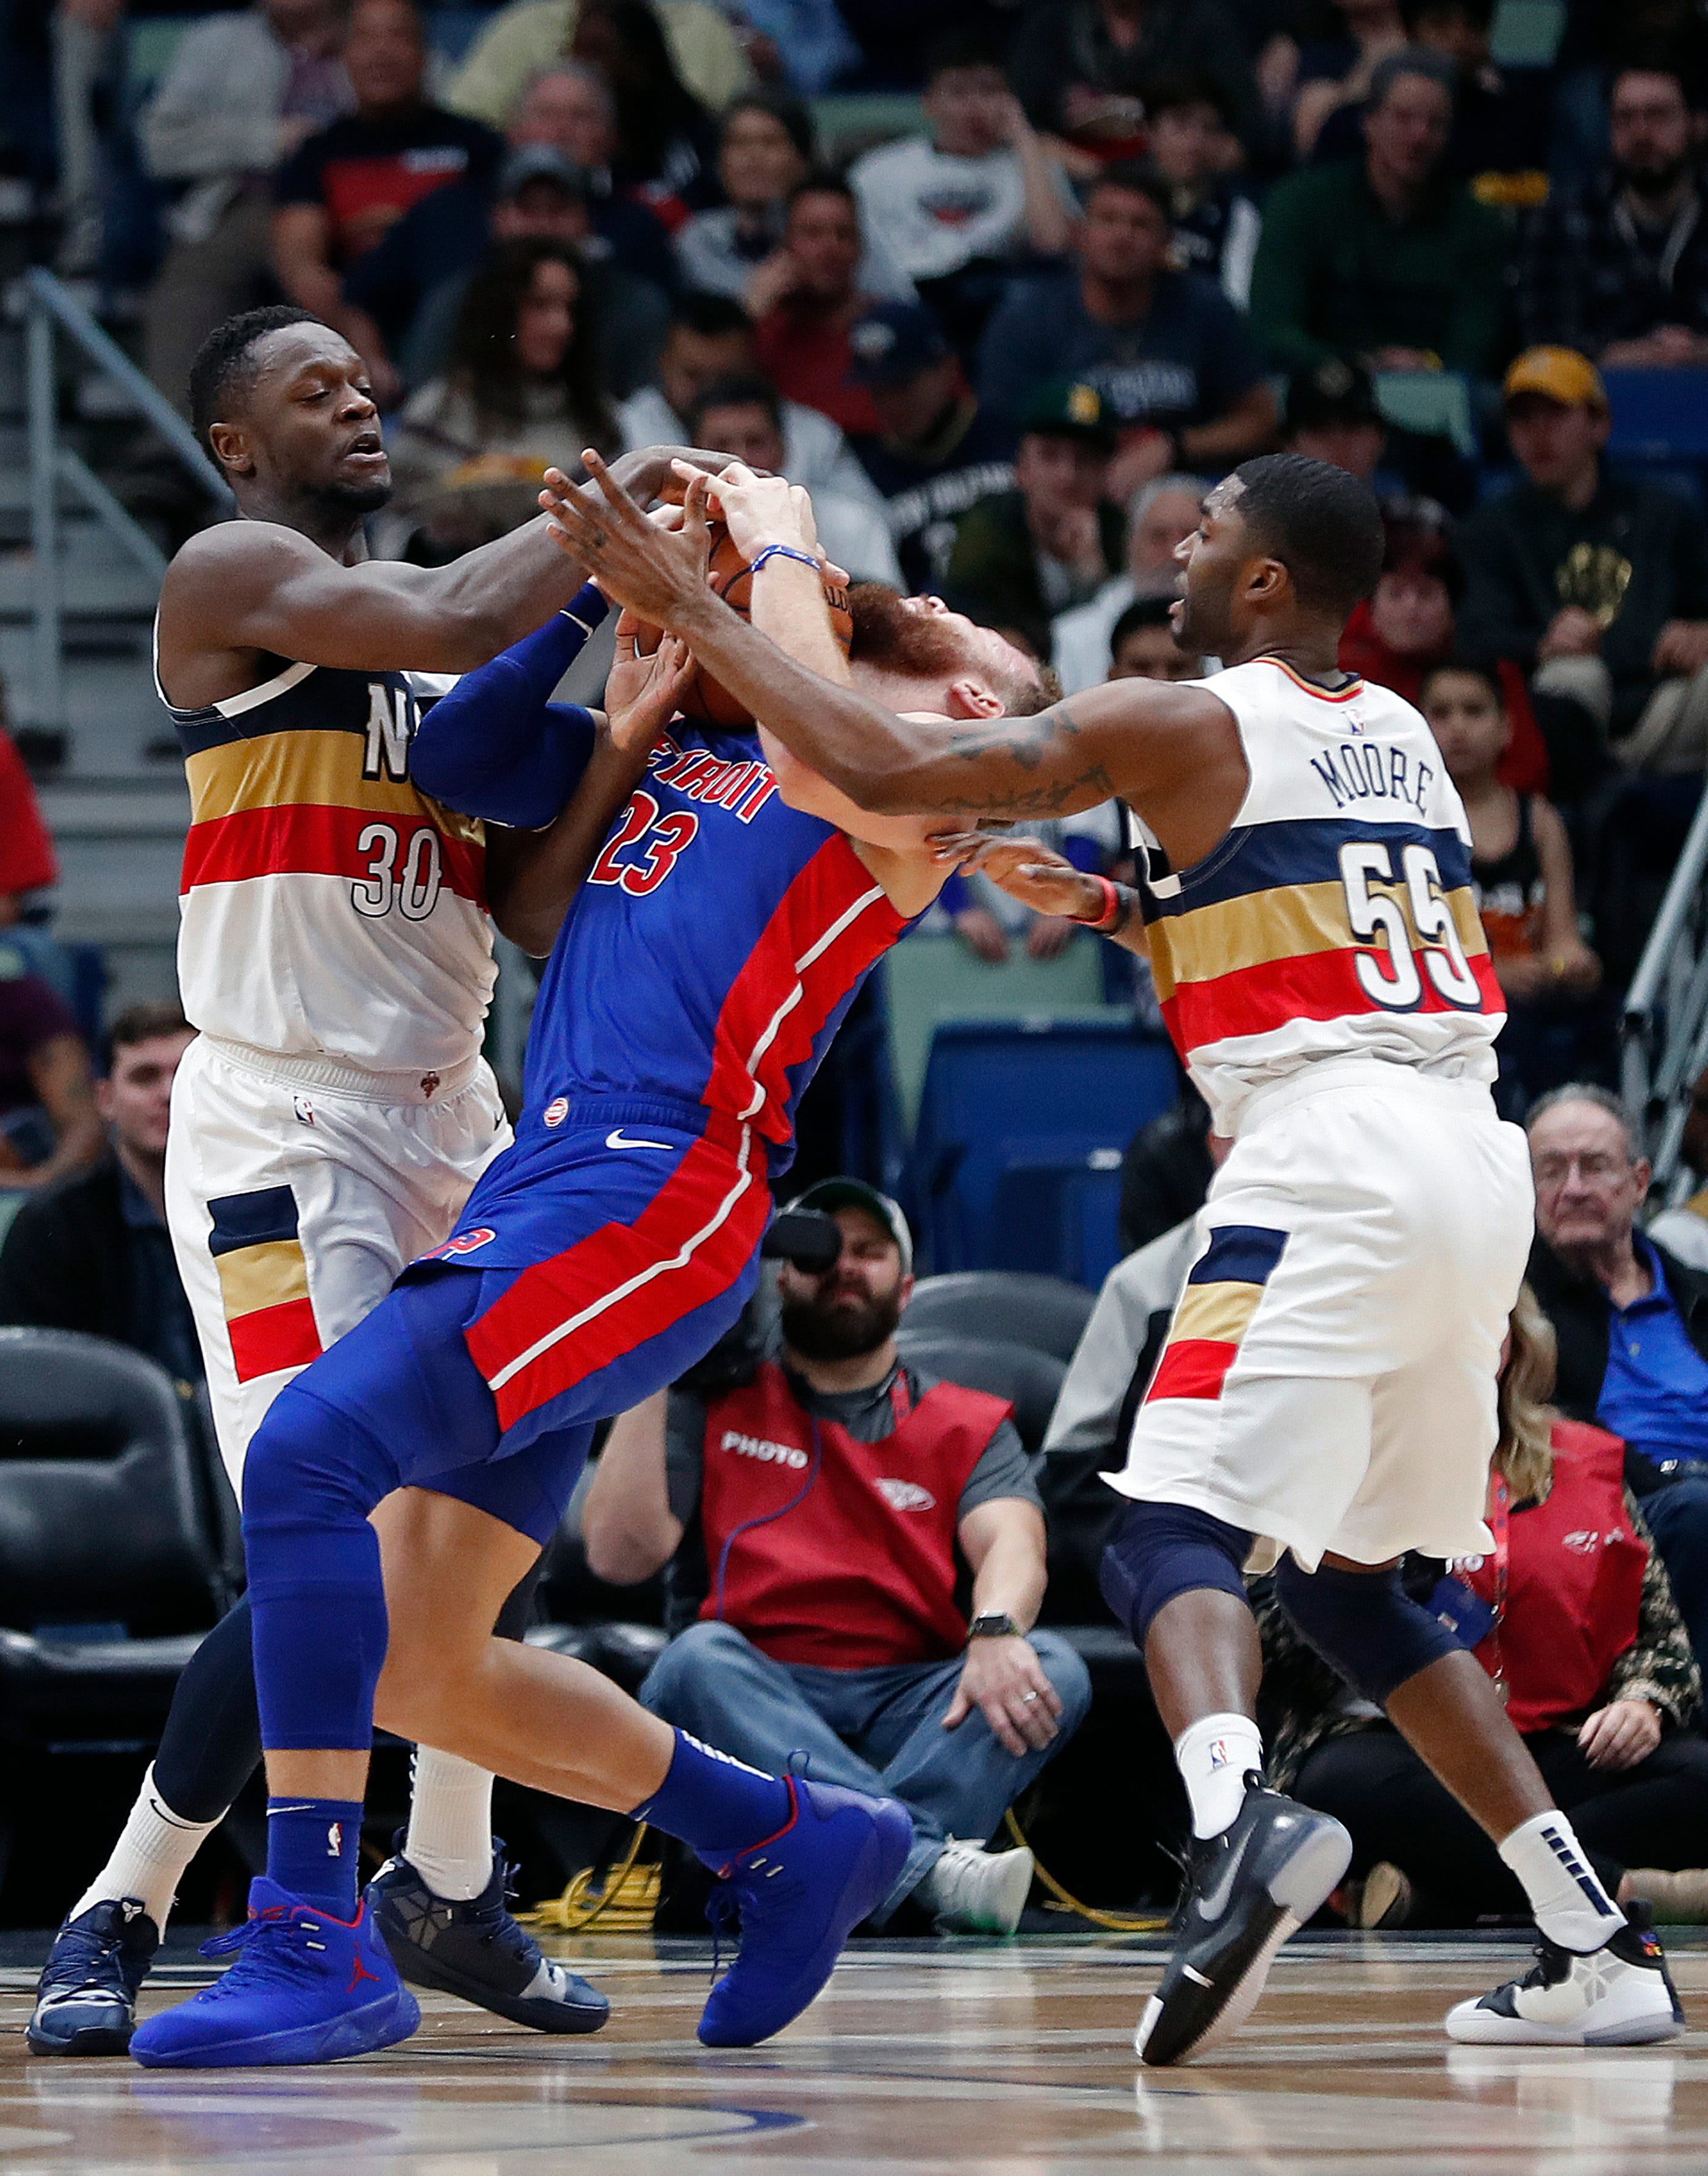 Detroit Pistons forward Blake Griffin (23) is double-teamed by New Orleans Pelicans center Julius Randle (30) and guard E'Twaun Moore (55) in the second half.